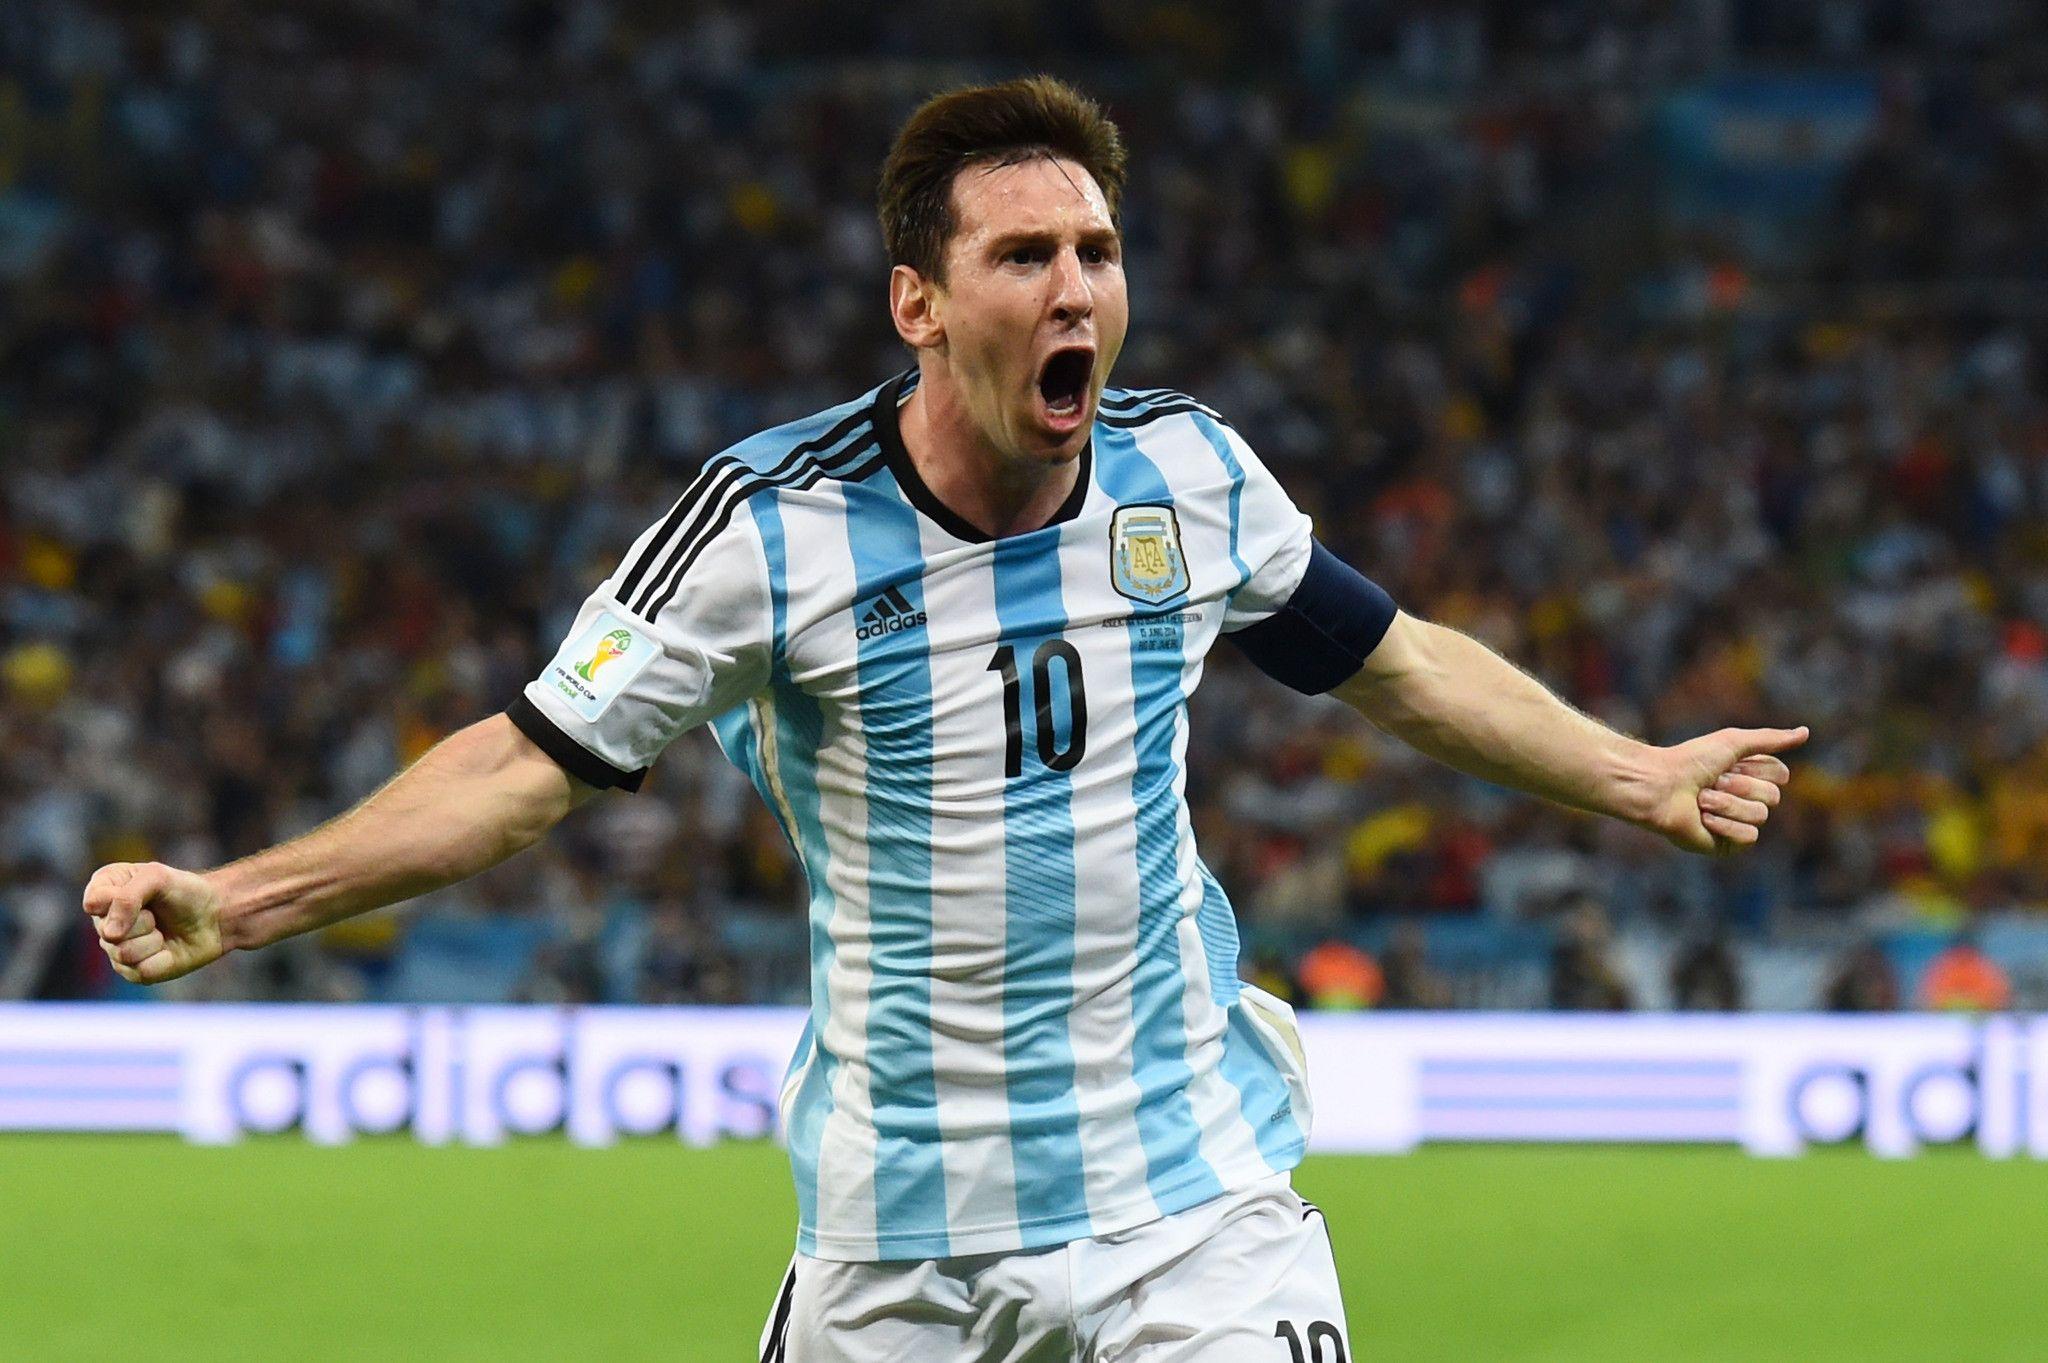 Lionel Messi Argentina Goal Celebration In FIFA World Cup 2014